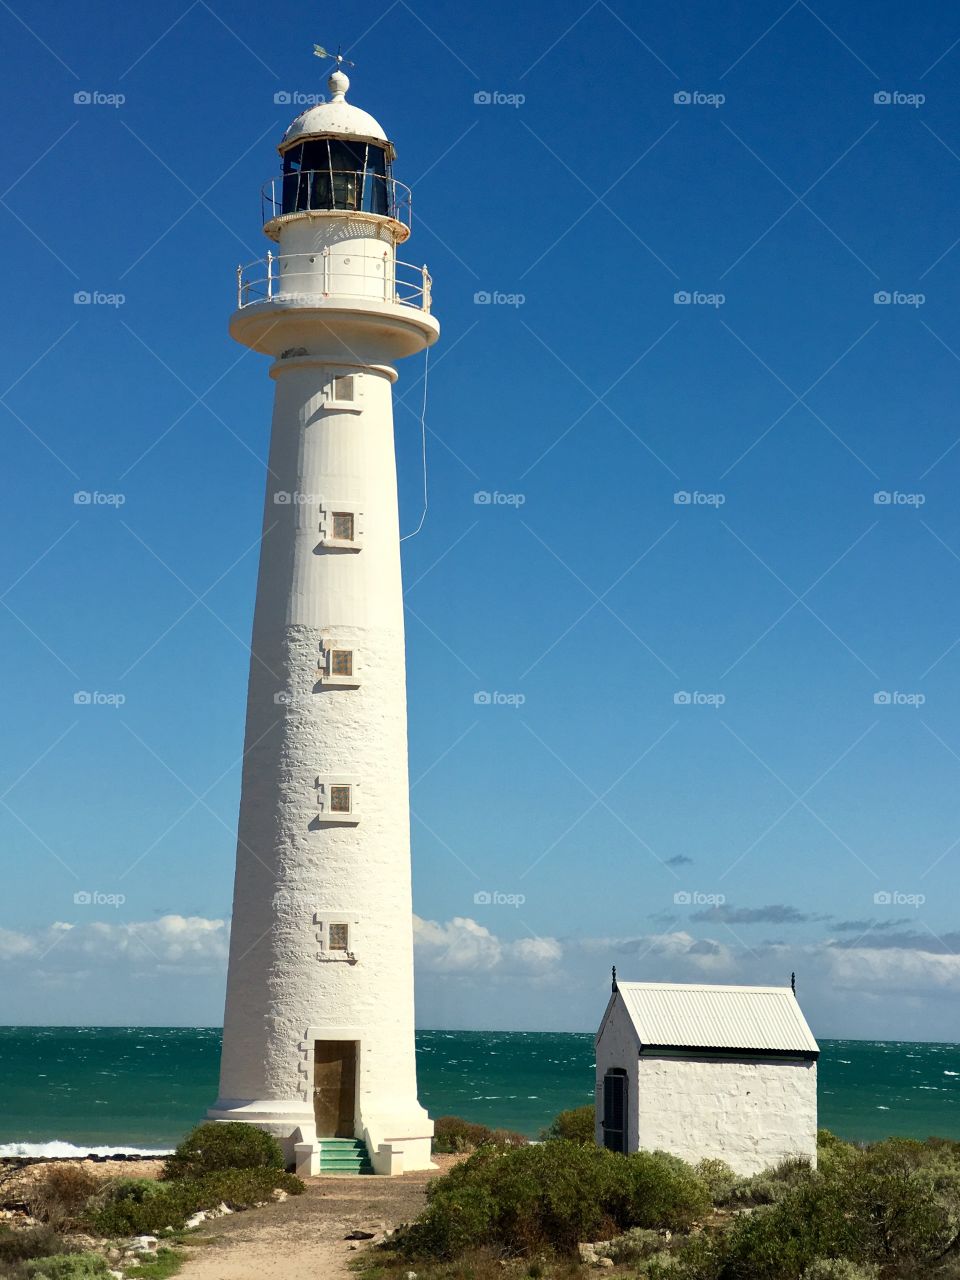 Old White lighthouse on a clear vivid blue day in south Australia; Point Lowly on the Eyre Peninsula in the Spencer Gulf. See my portfolio for more lighthouse photos